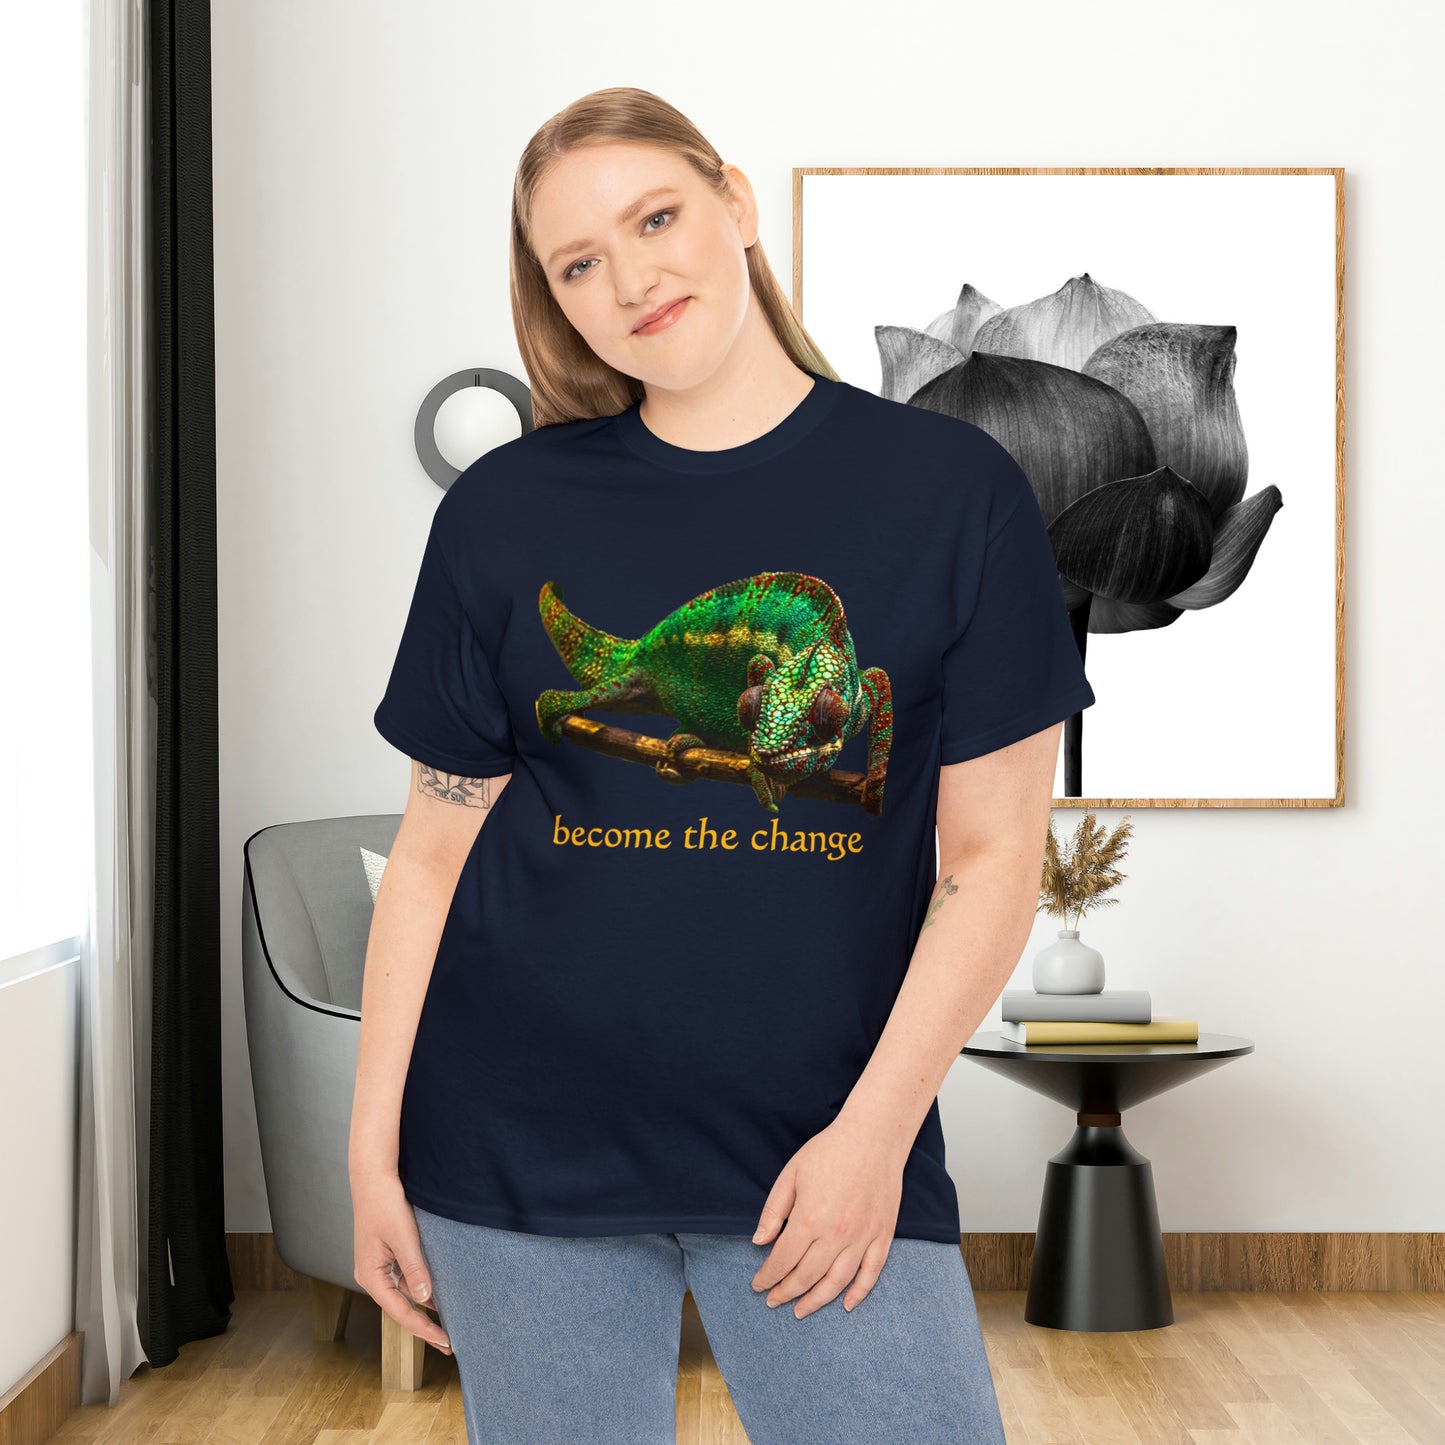 Want change? Don’t wait! “become the change" Unisex Heavy Cotton Tee makes for a great gift or get one to enjoy yourself. Change can be very good indeed!